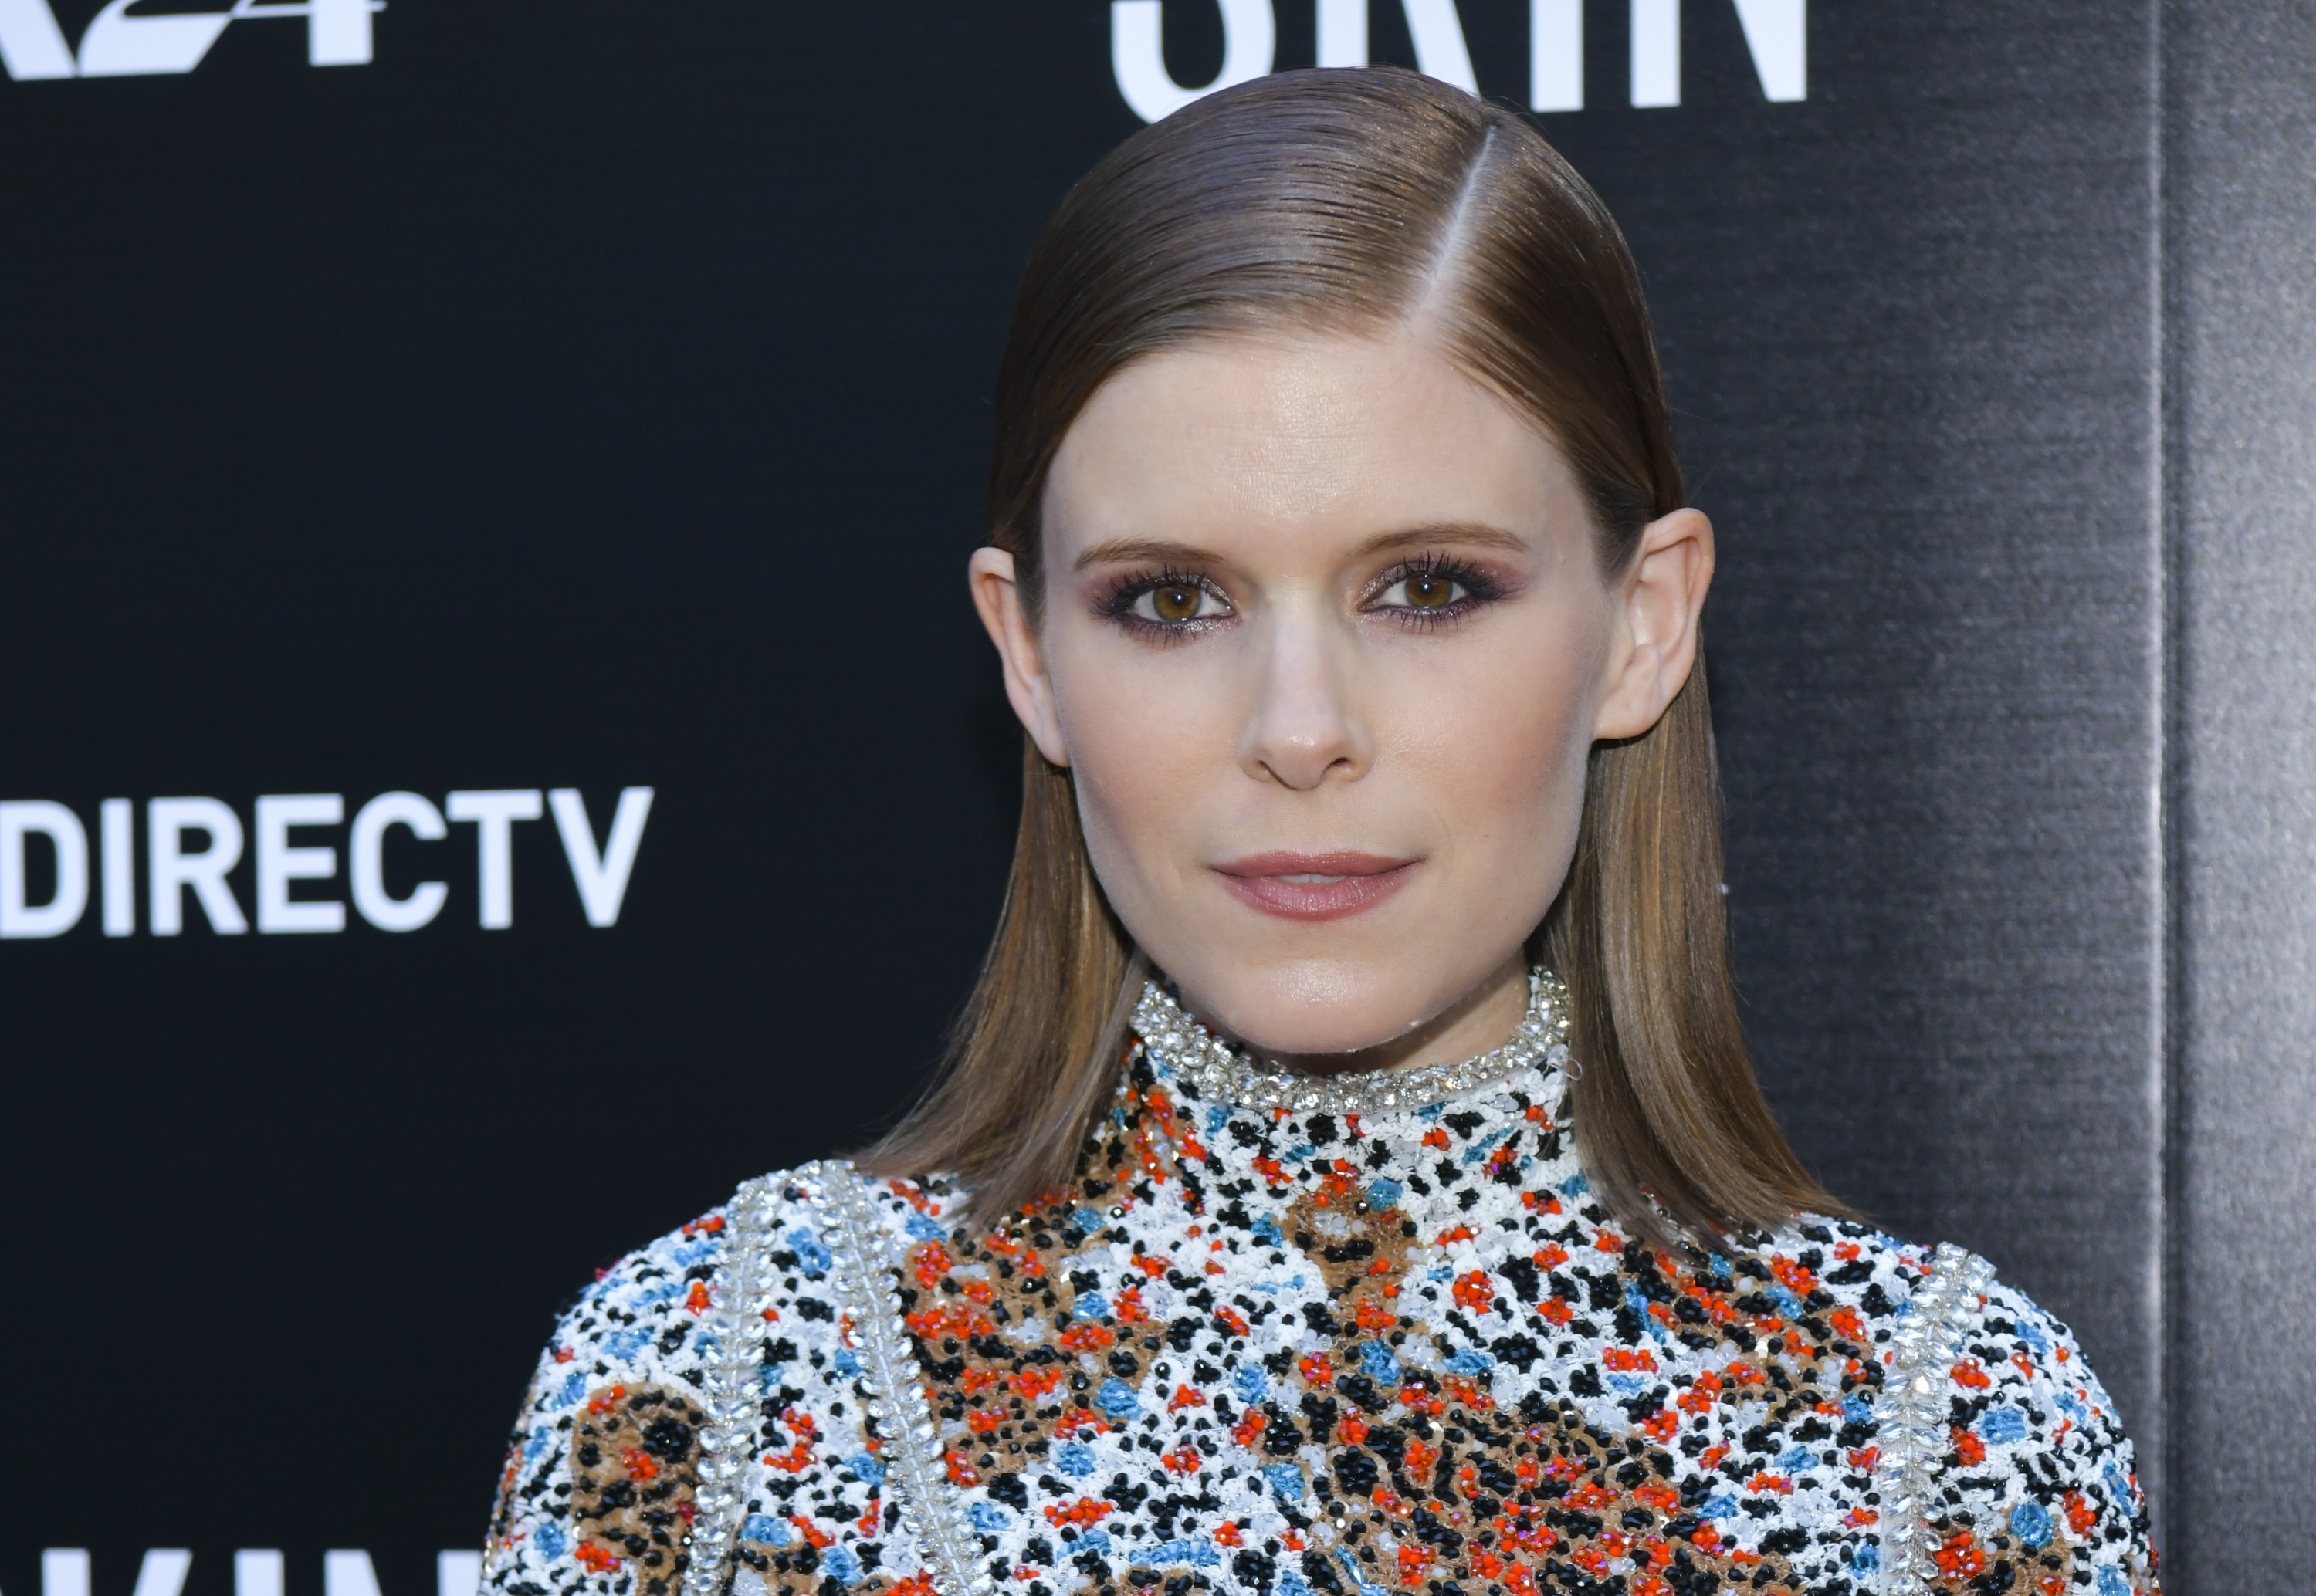 Kate Mara attends LA special screening of A24's "Skin" at ArcLight Hollywood on July 11, 2019 in Hollywood, California (Rodin Eckenroth—FilmMagic via Getty Images)